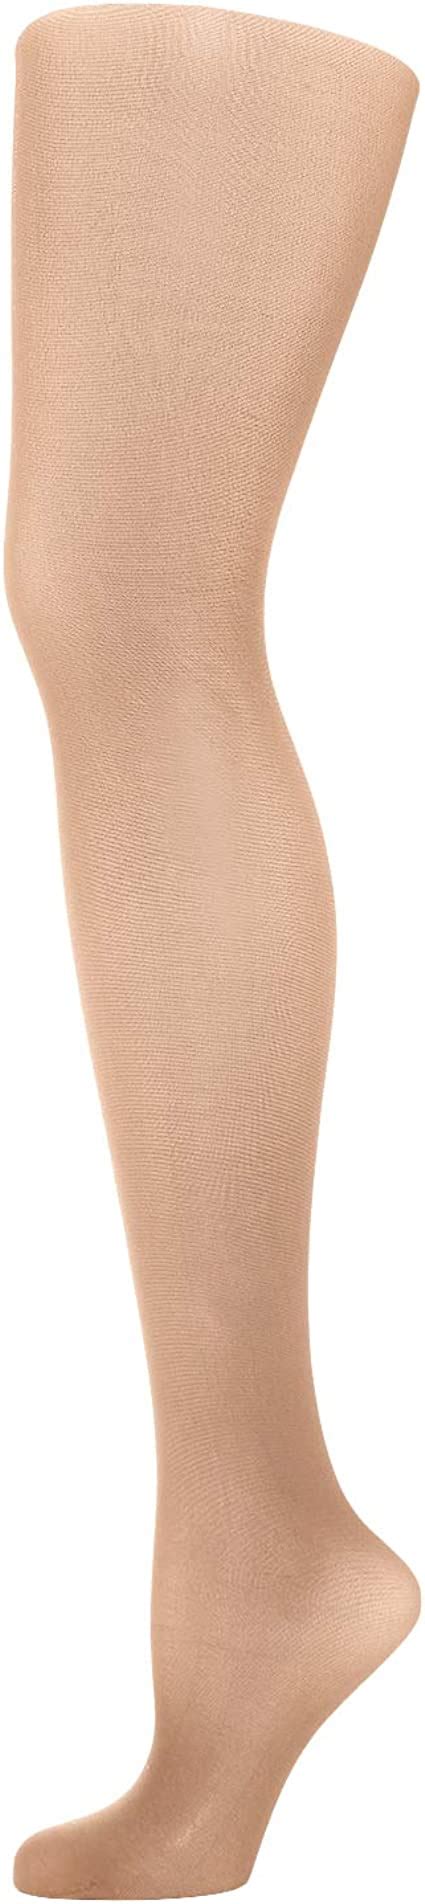 wolford women s naked 8 tights at amazon women s clothing store